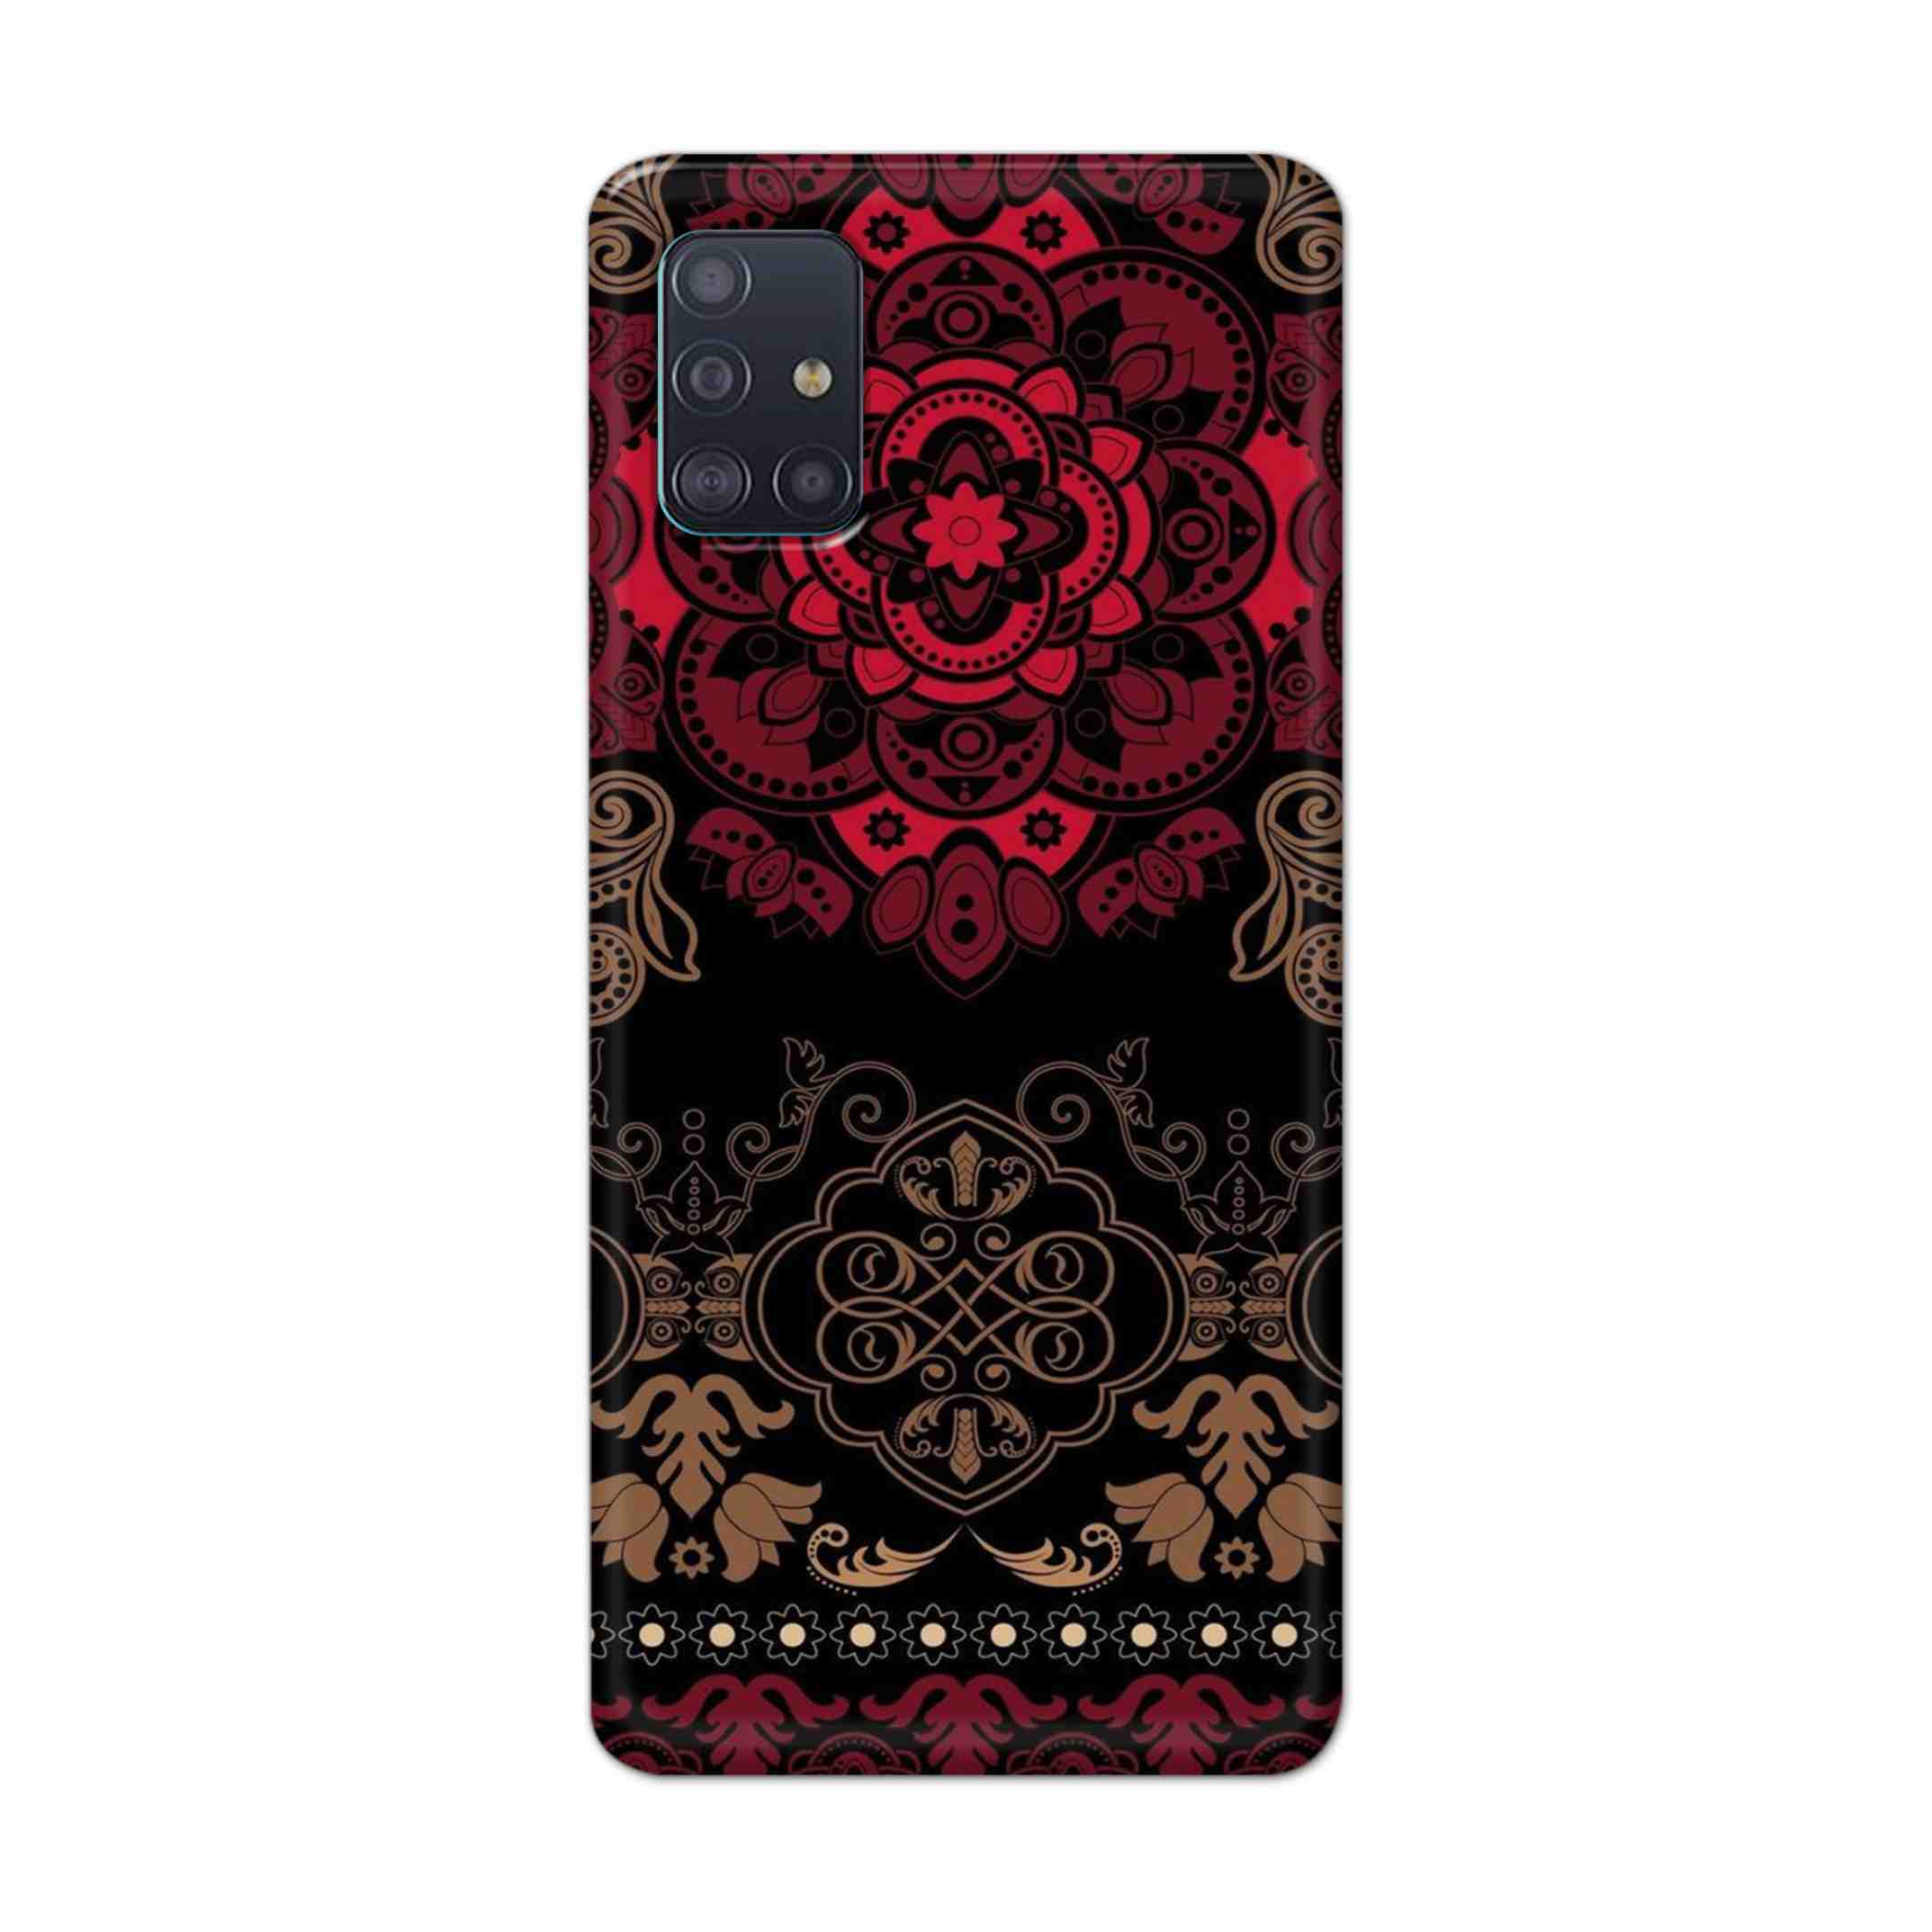 Buy Christian Mandalas Hard Back Mobile Phone Case Cover For Samsung Galaxy A71 Online